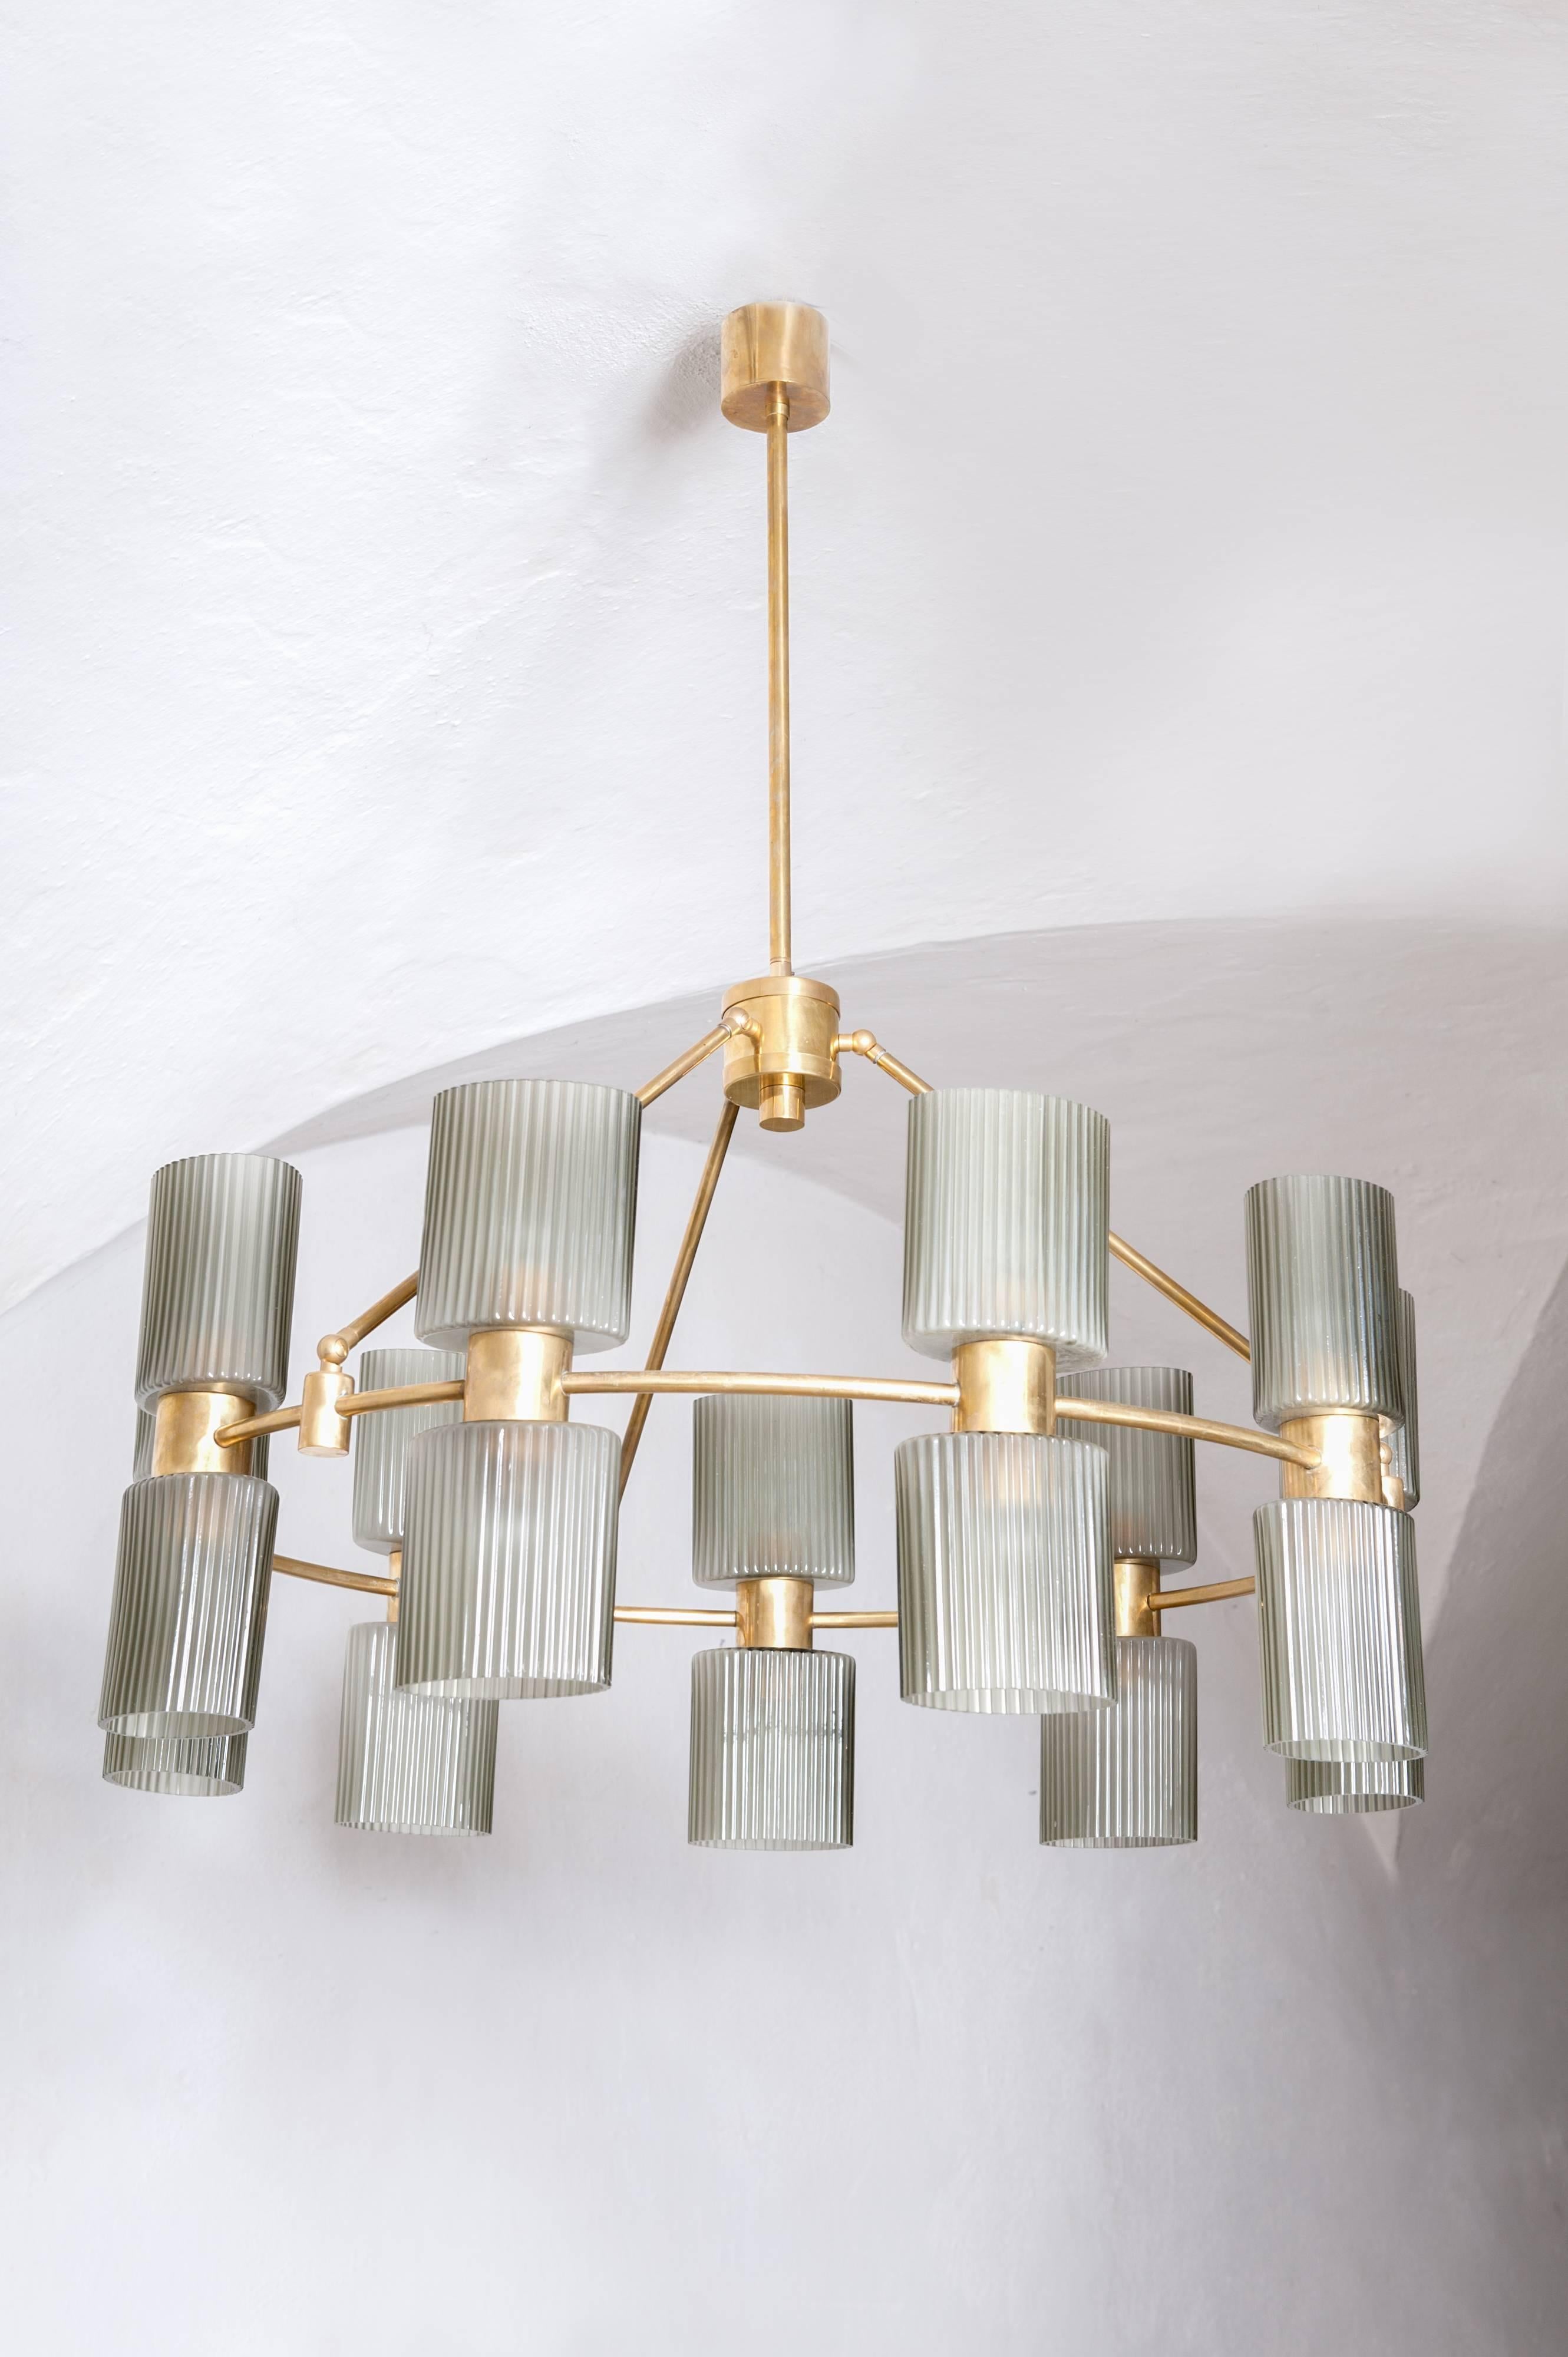 Classical designed lighting object with eighteen-bulb sockets.
The ribbed, grey Murano glass shades are oval shaped on a round brass mounting.
(There are two corresponding wall appliques available, see photo).